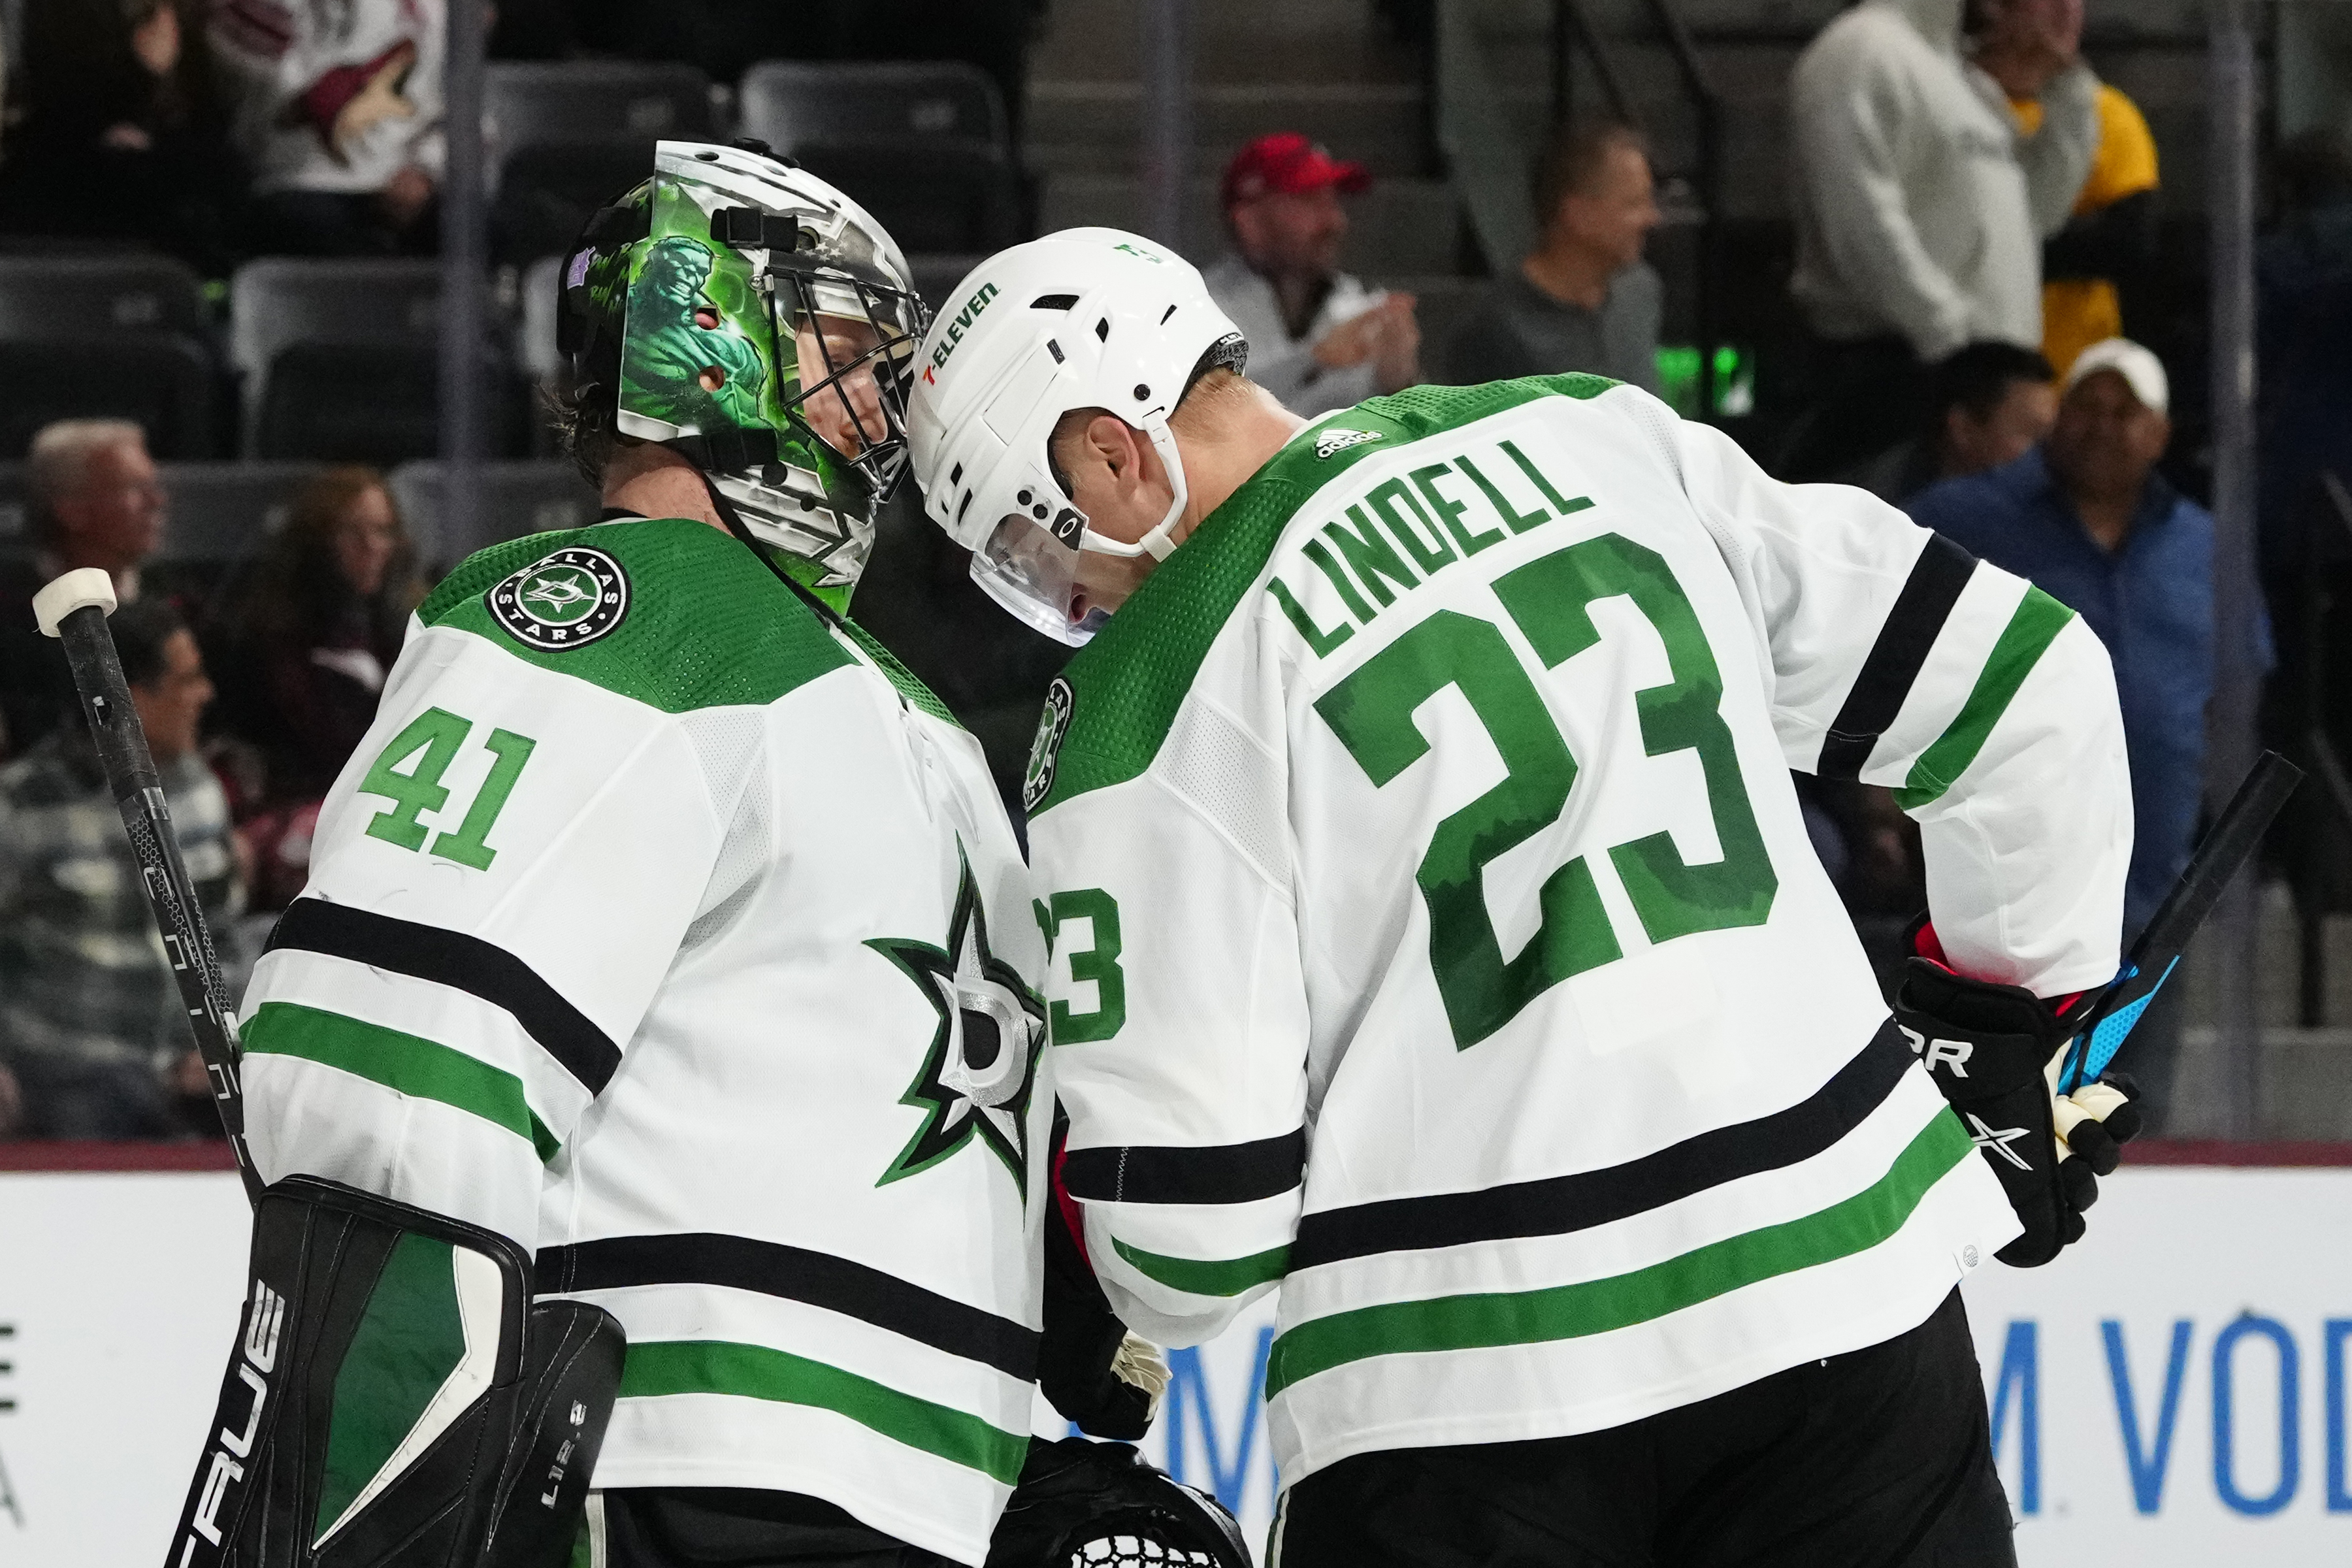 Stars' goalie Jake Oettinger exits game with injury in loss to Rangers